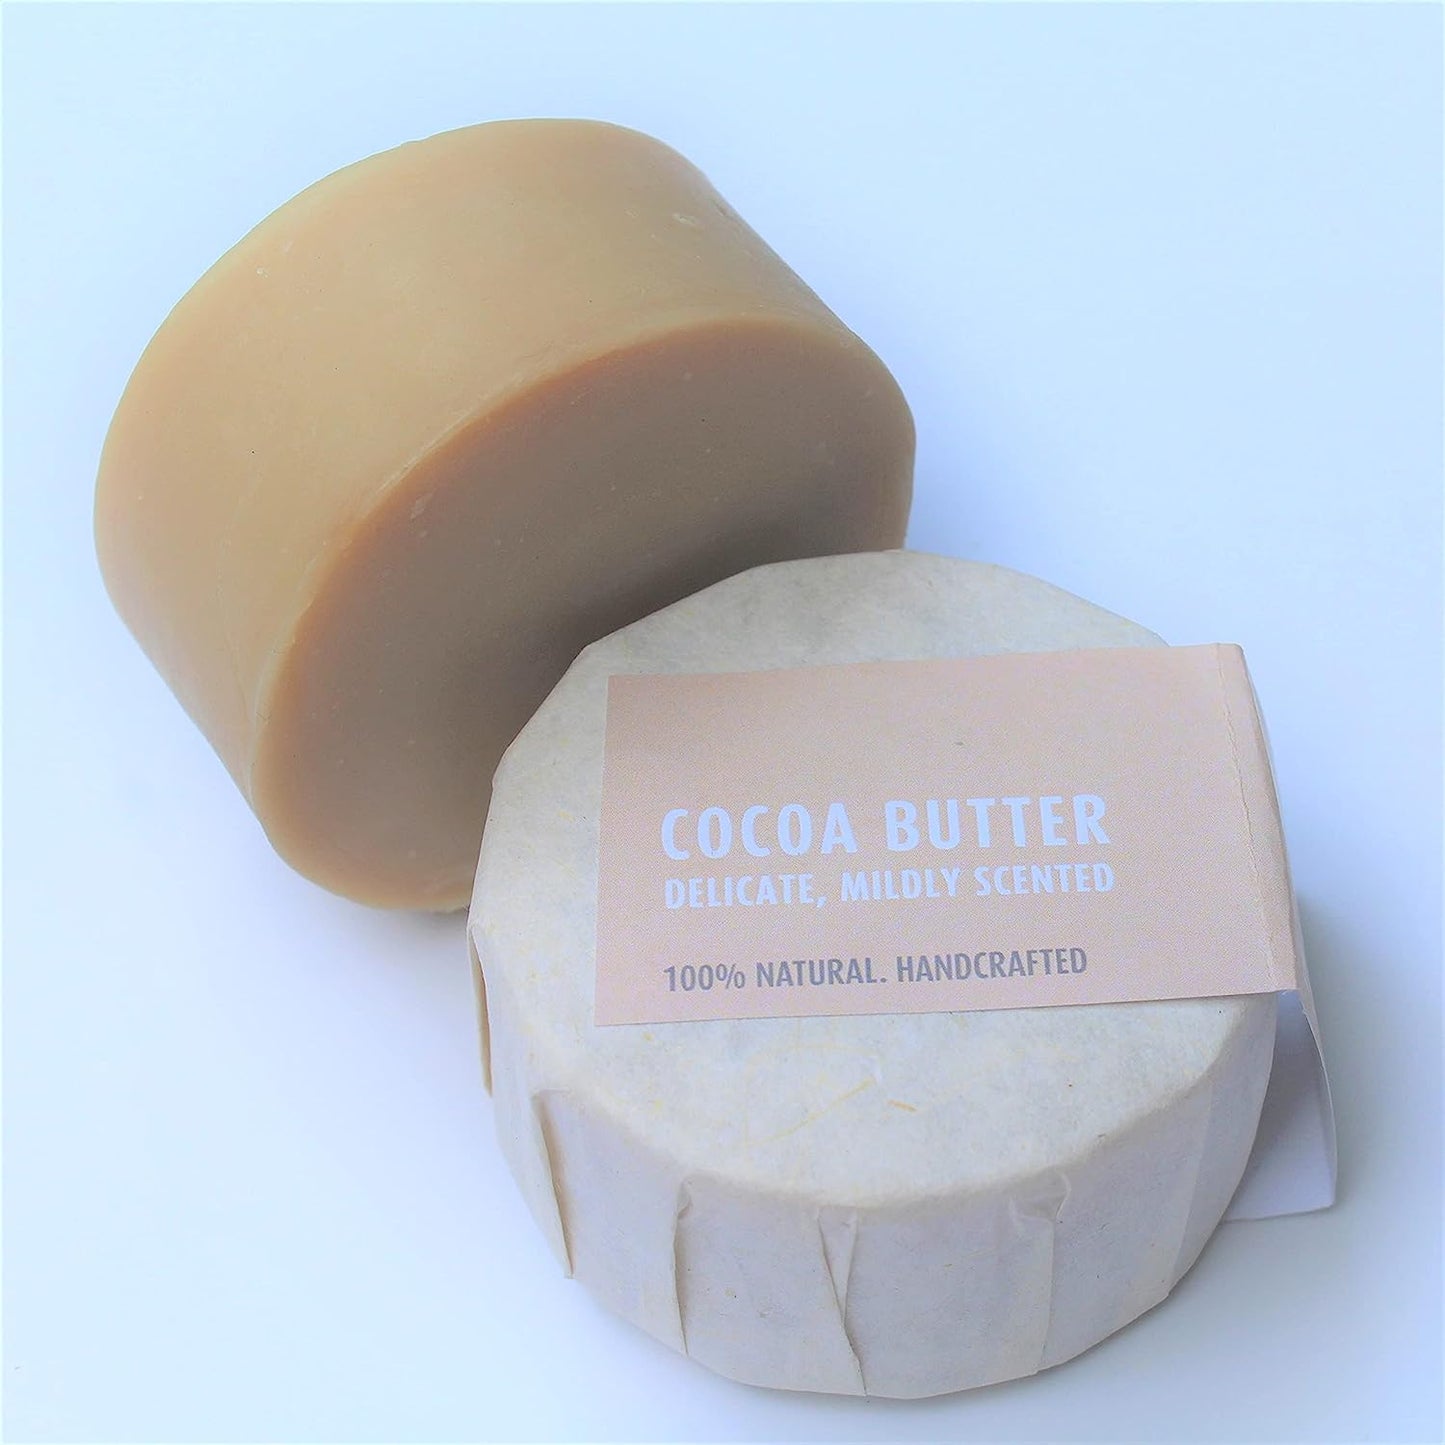 Coconess Cocoa Butter Soap | Delicate. Mildly Scented. | 100% Natural. Handcrafted | 100 gms.